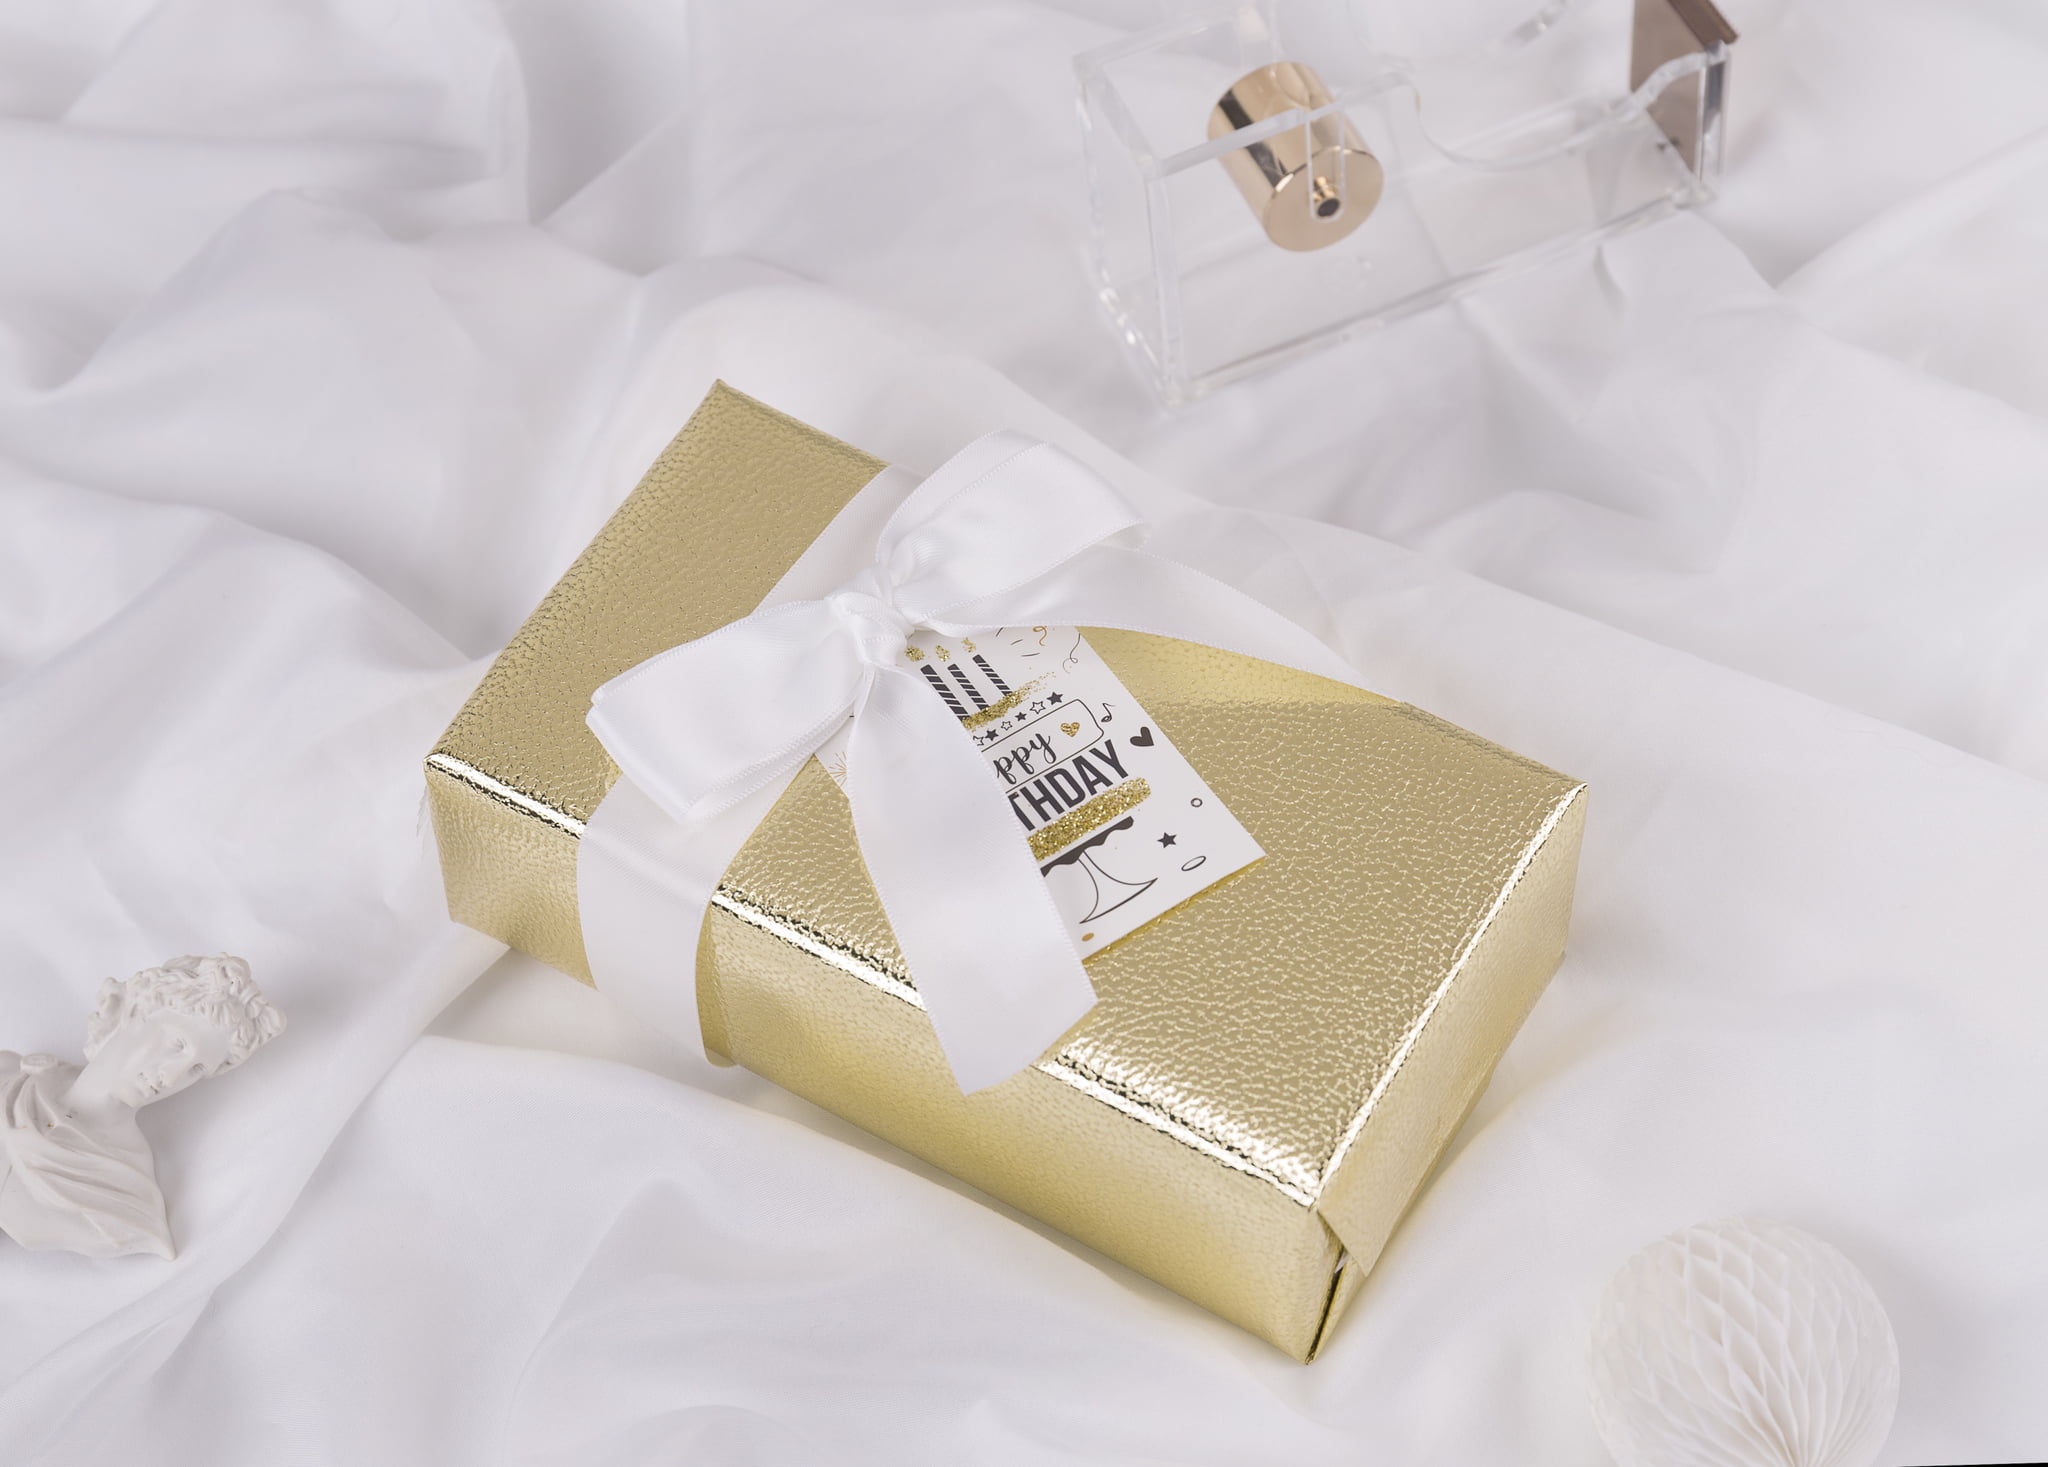 16m GOLD SPOT SPARKLE WRAPPING PAPER WEDDING BIRTHDAY CHRISTMAS GIFT WRAP 4m 